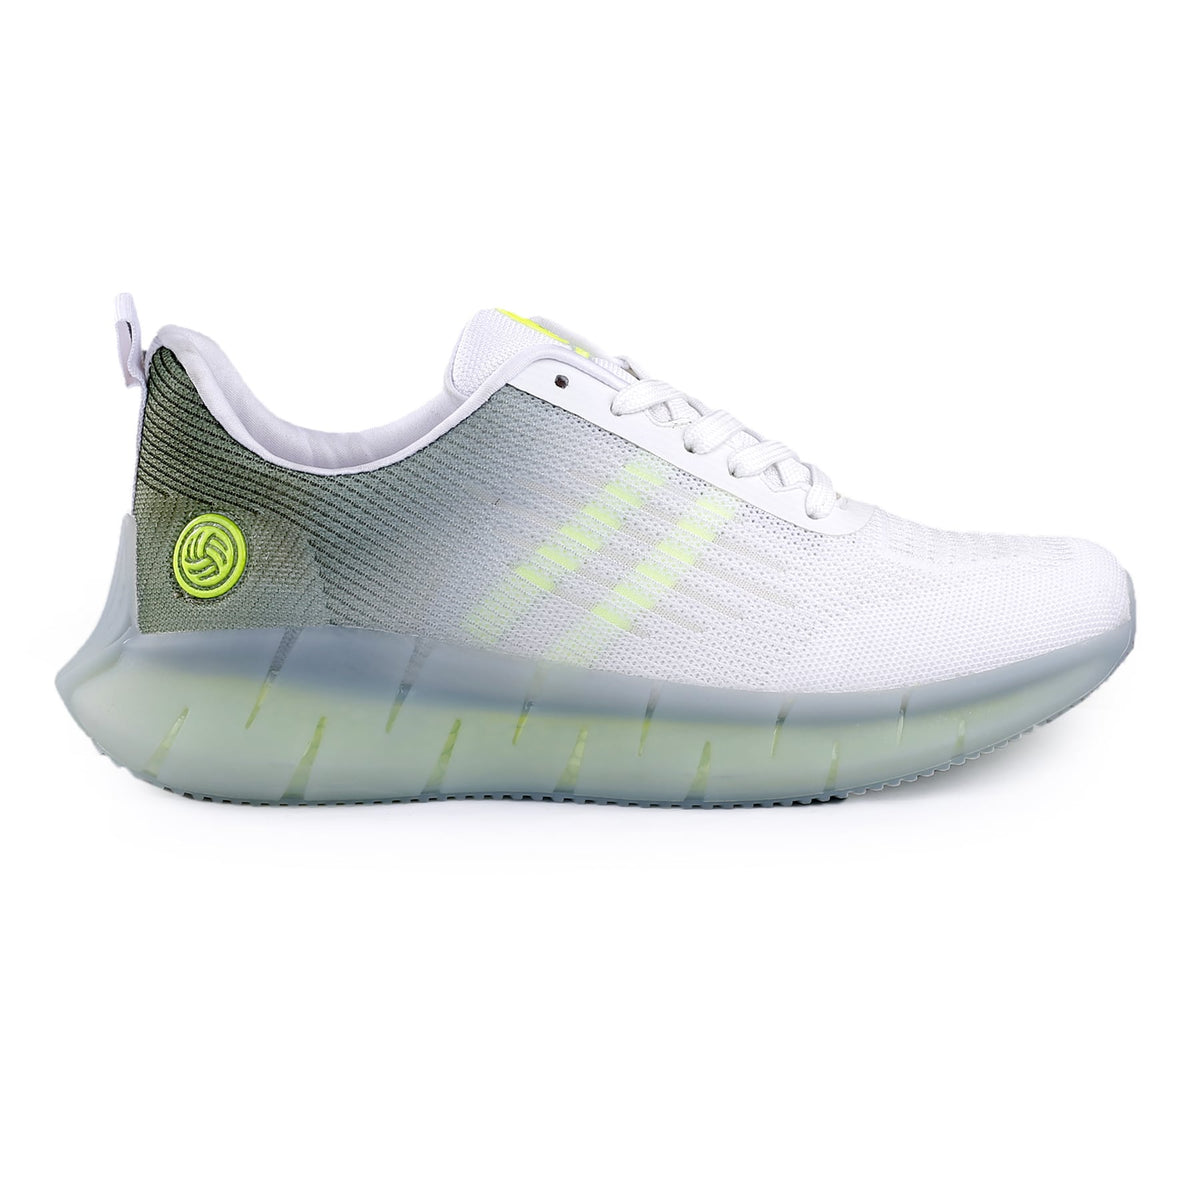 Bacca Bucci CHAMPION Running Sports Shoes | Lightweight & Sungfit for an Energetic Ride